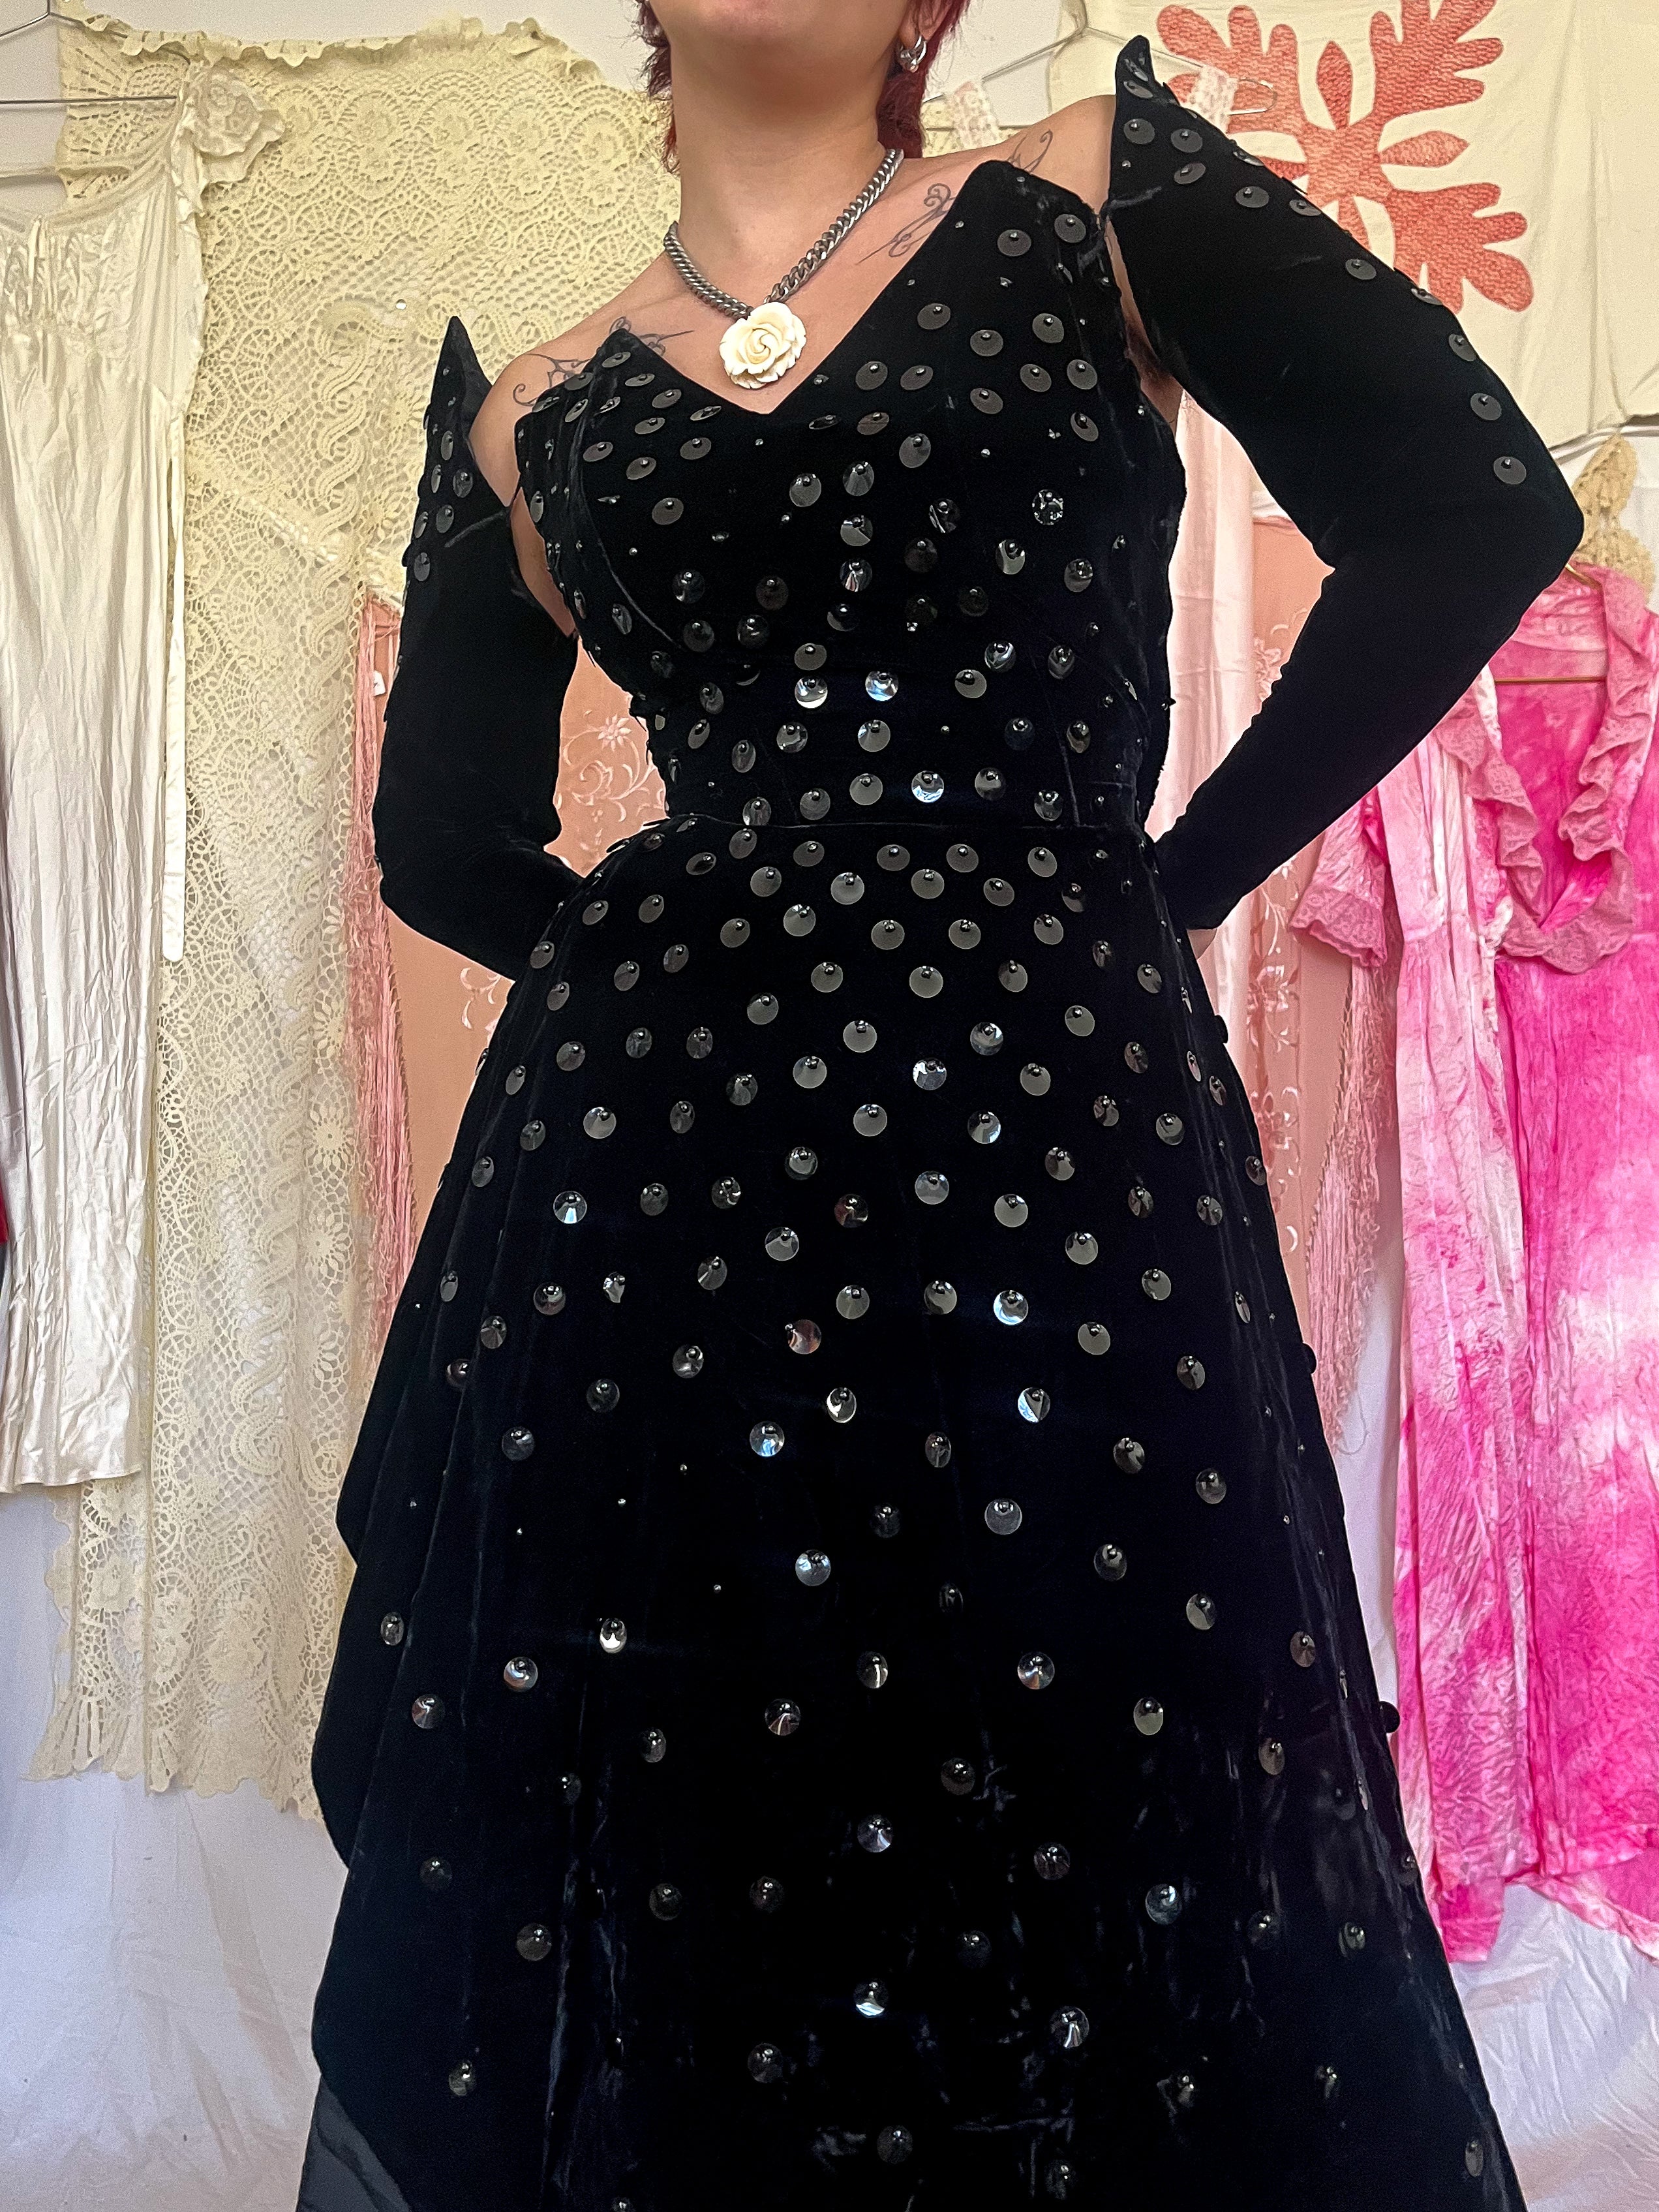 WITCHY SEQUINED DRESS